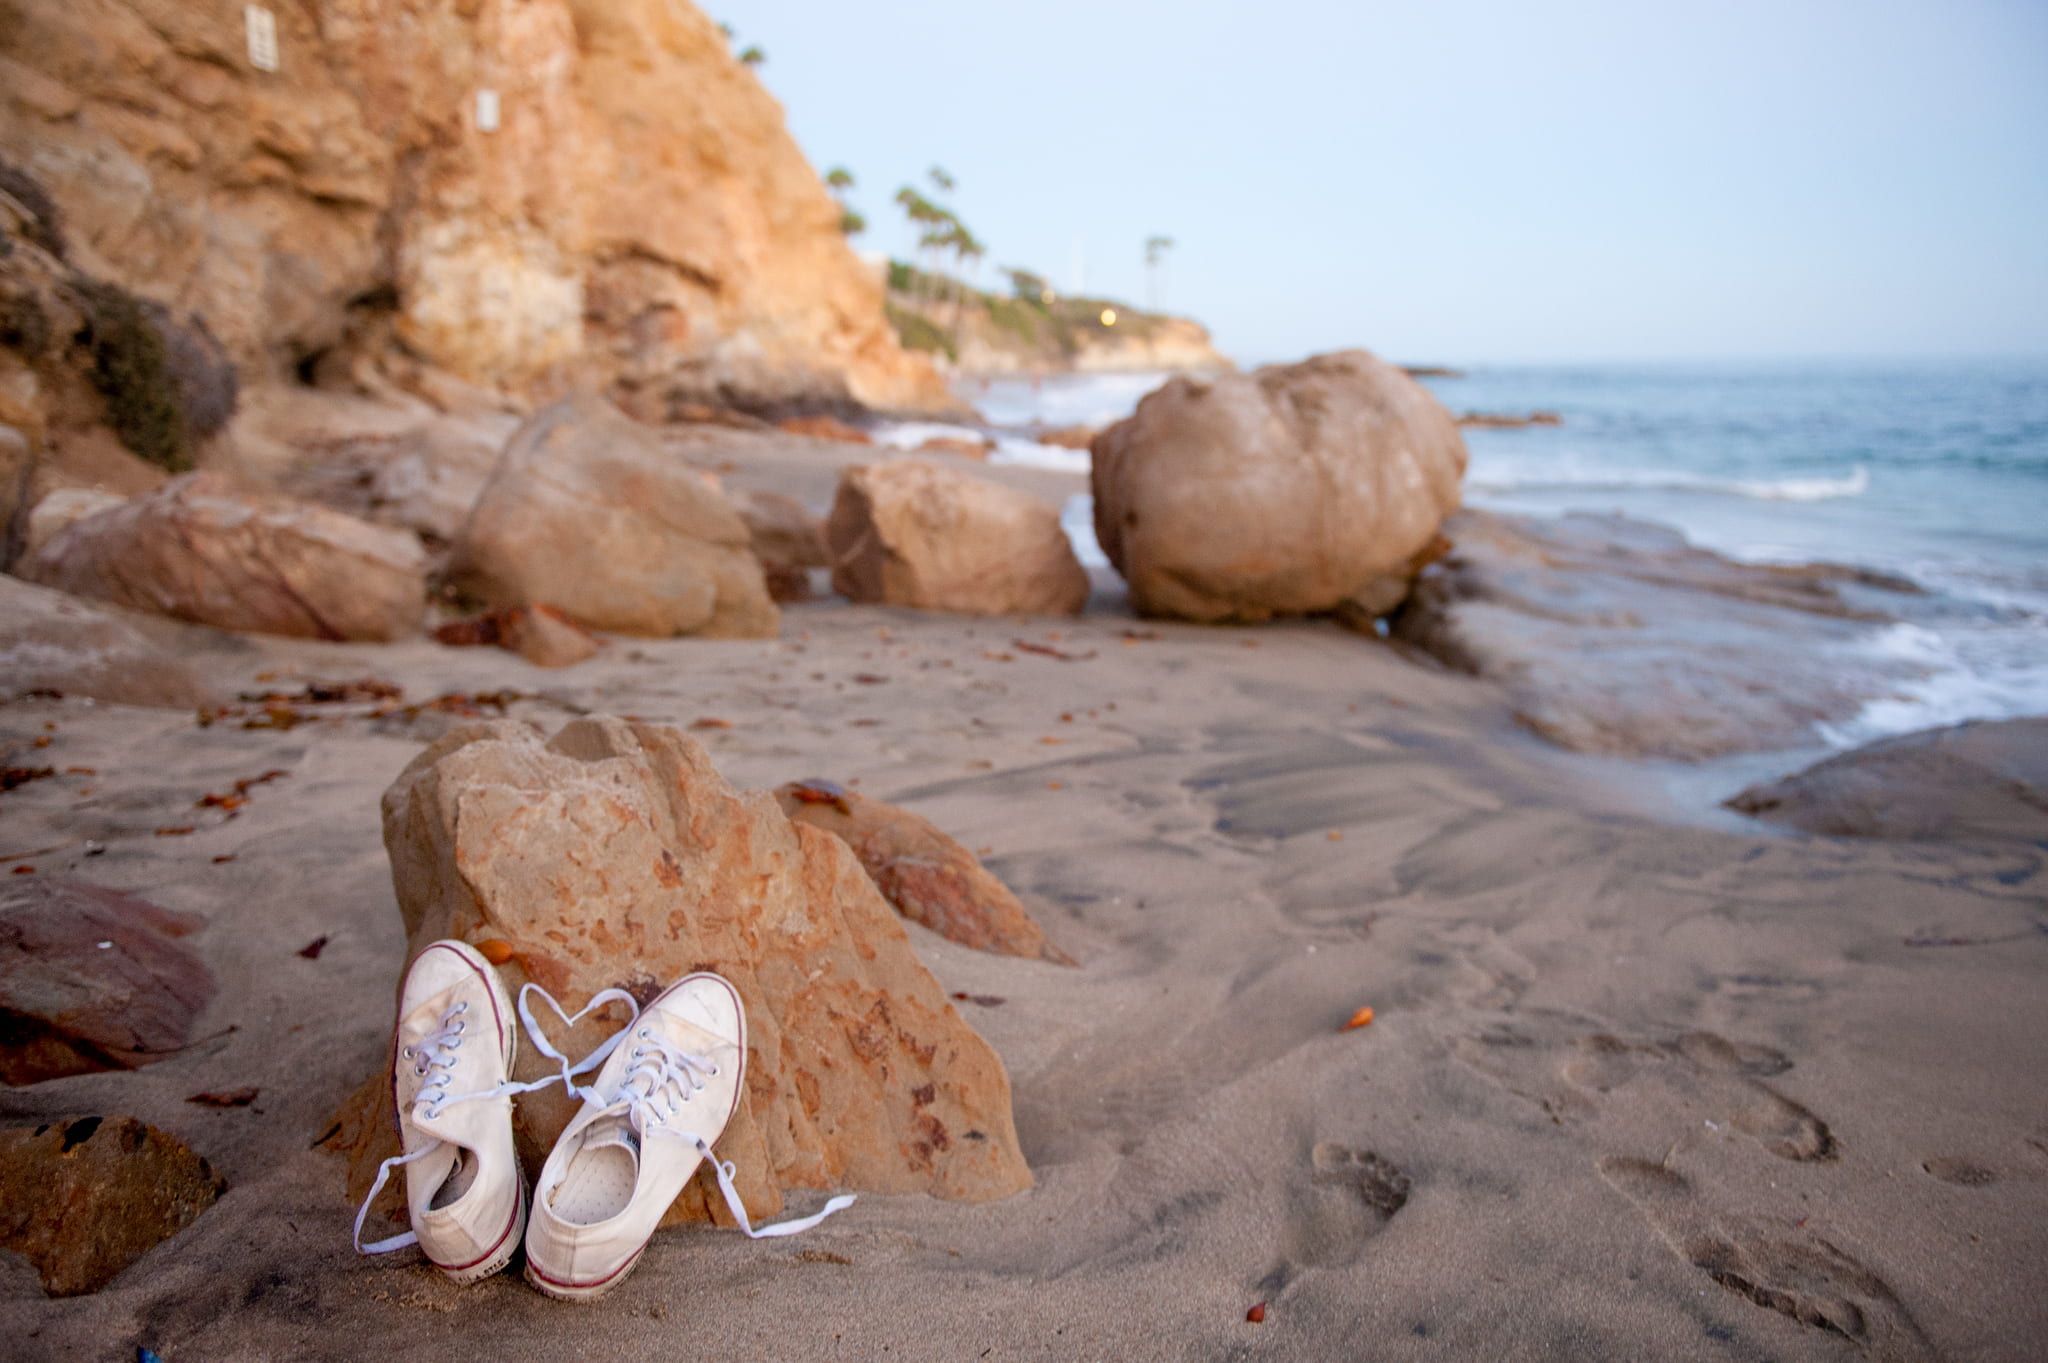 Shoes on a beach